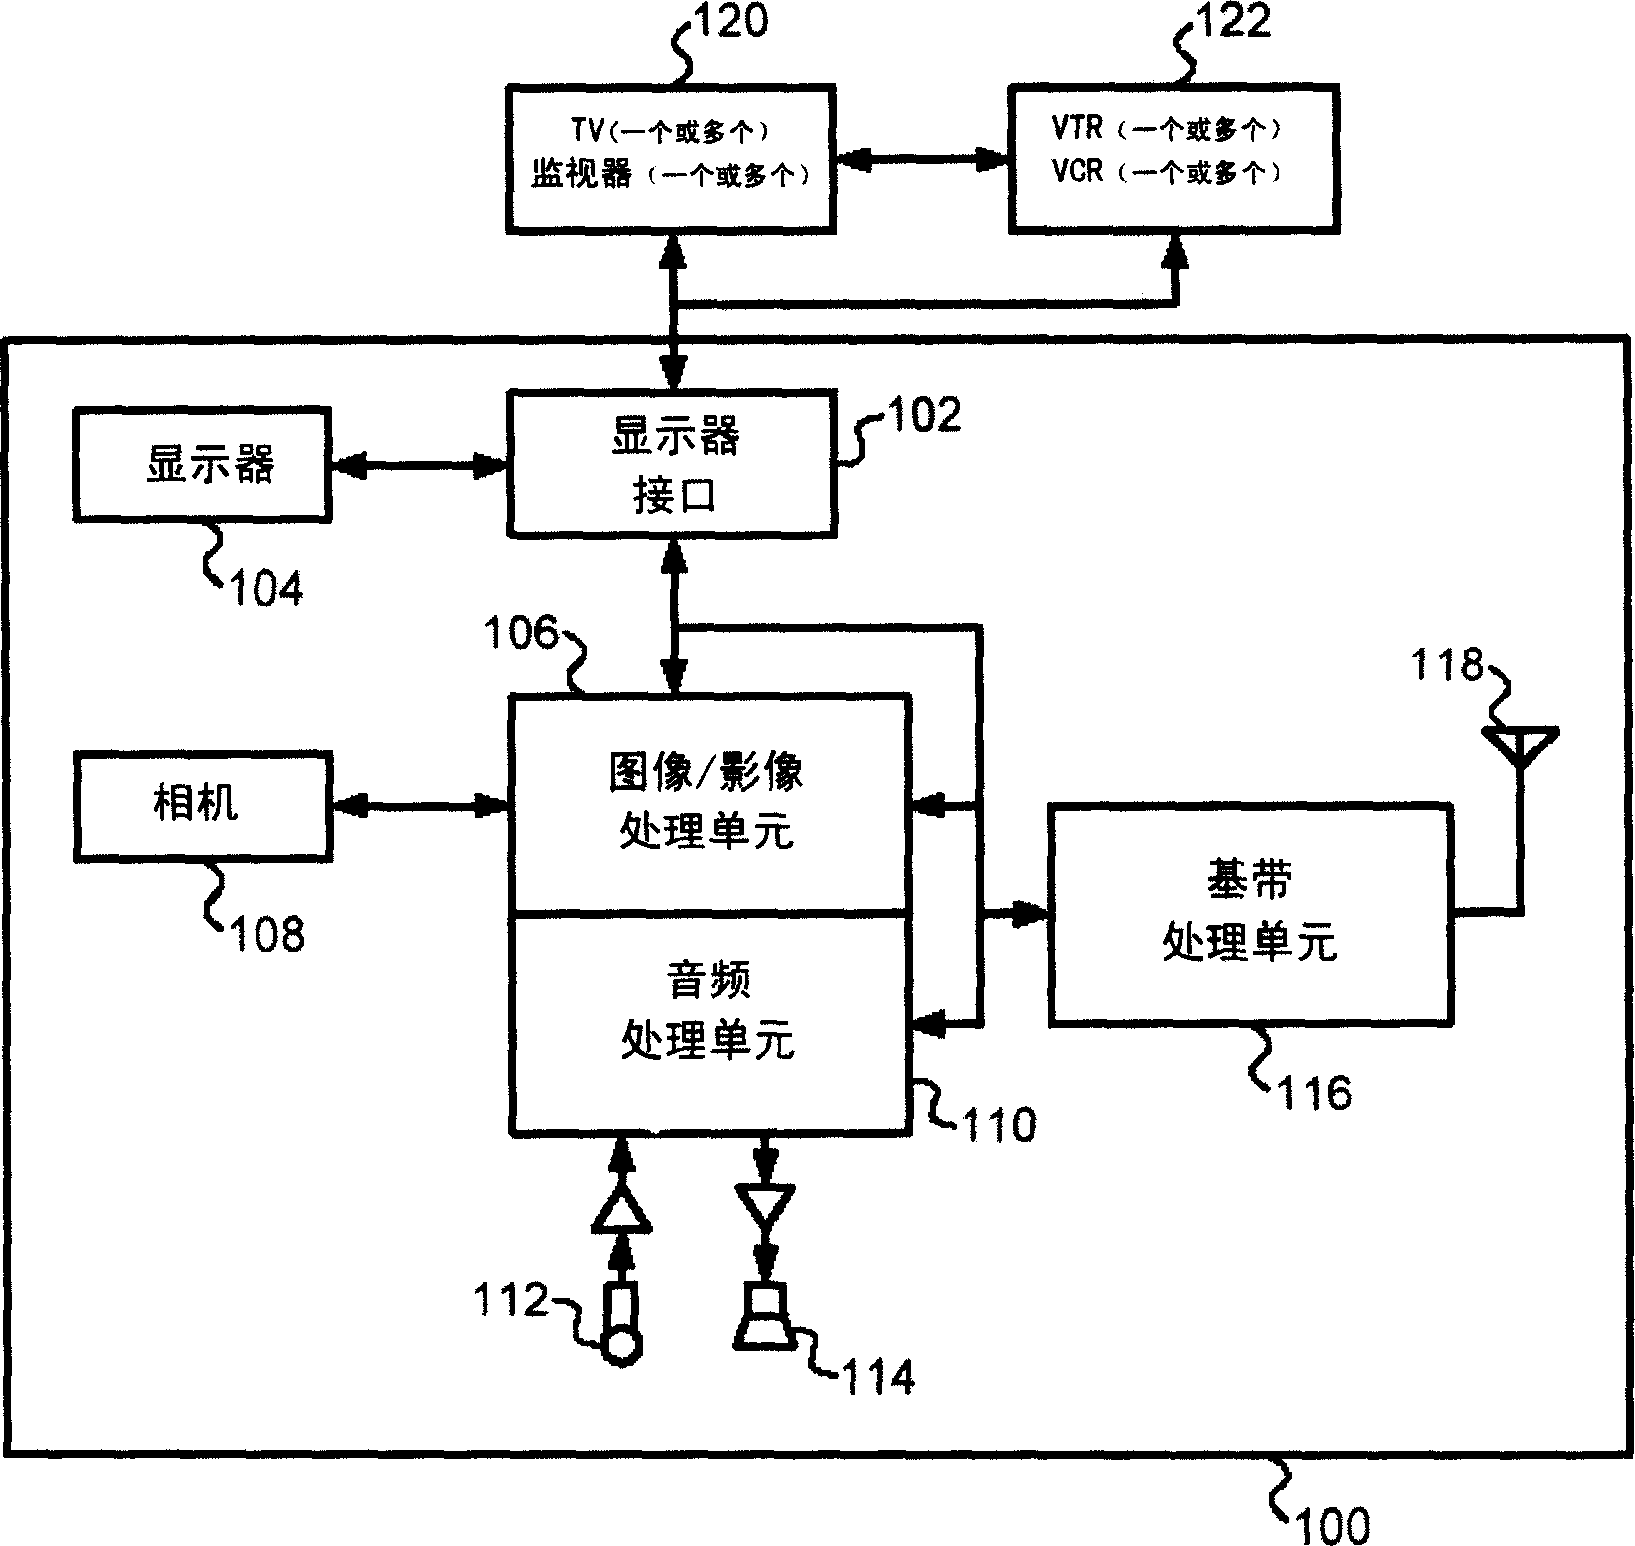 Multi-video interface for a mobile device